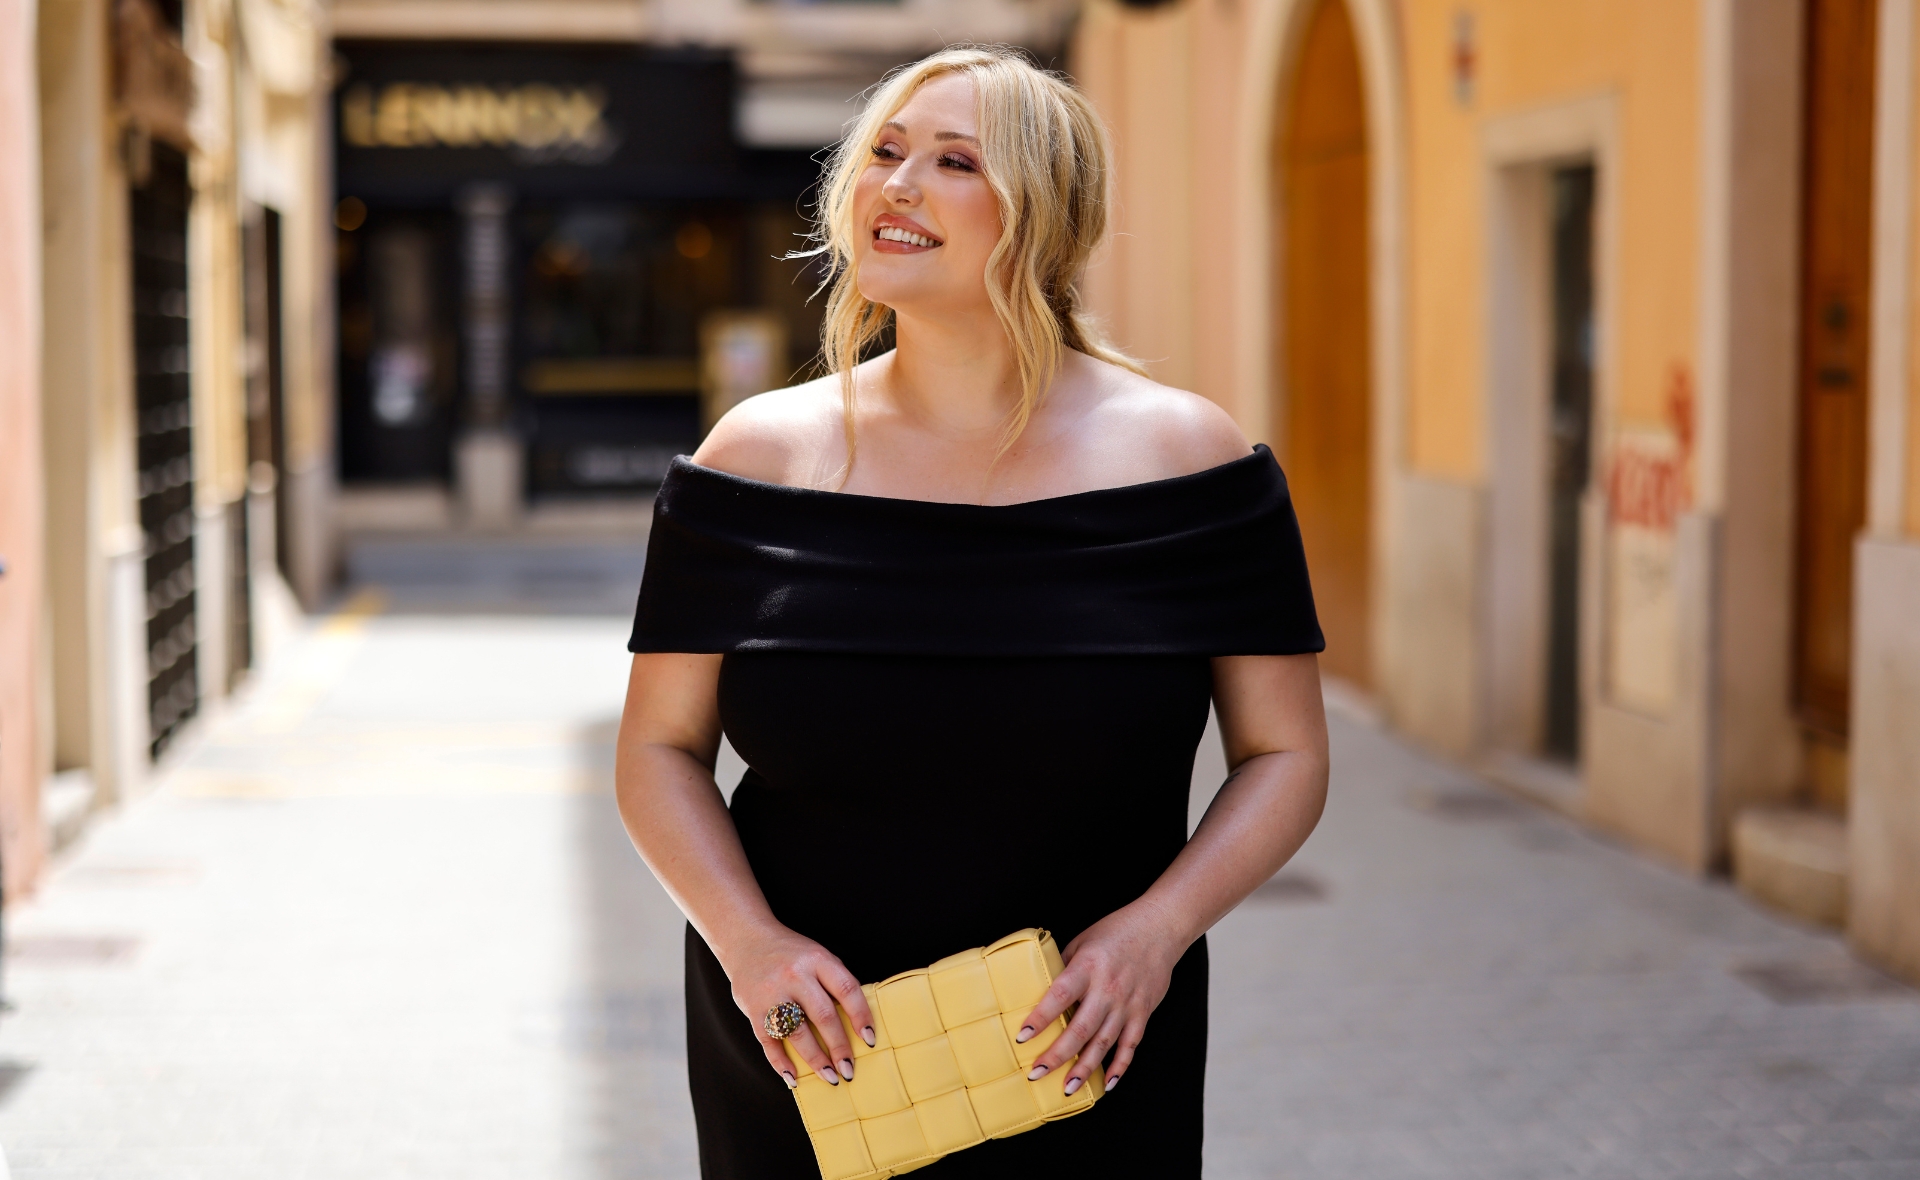 Where to find the perfect plus-size formal dresses for your next event